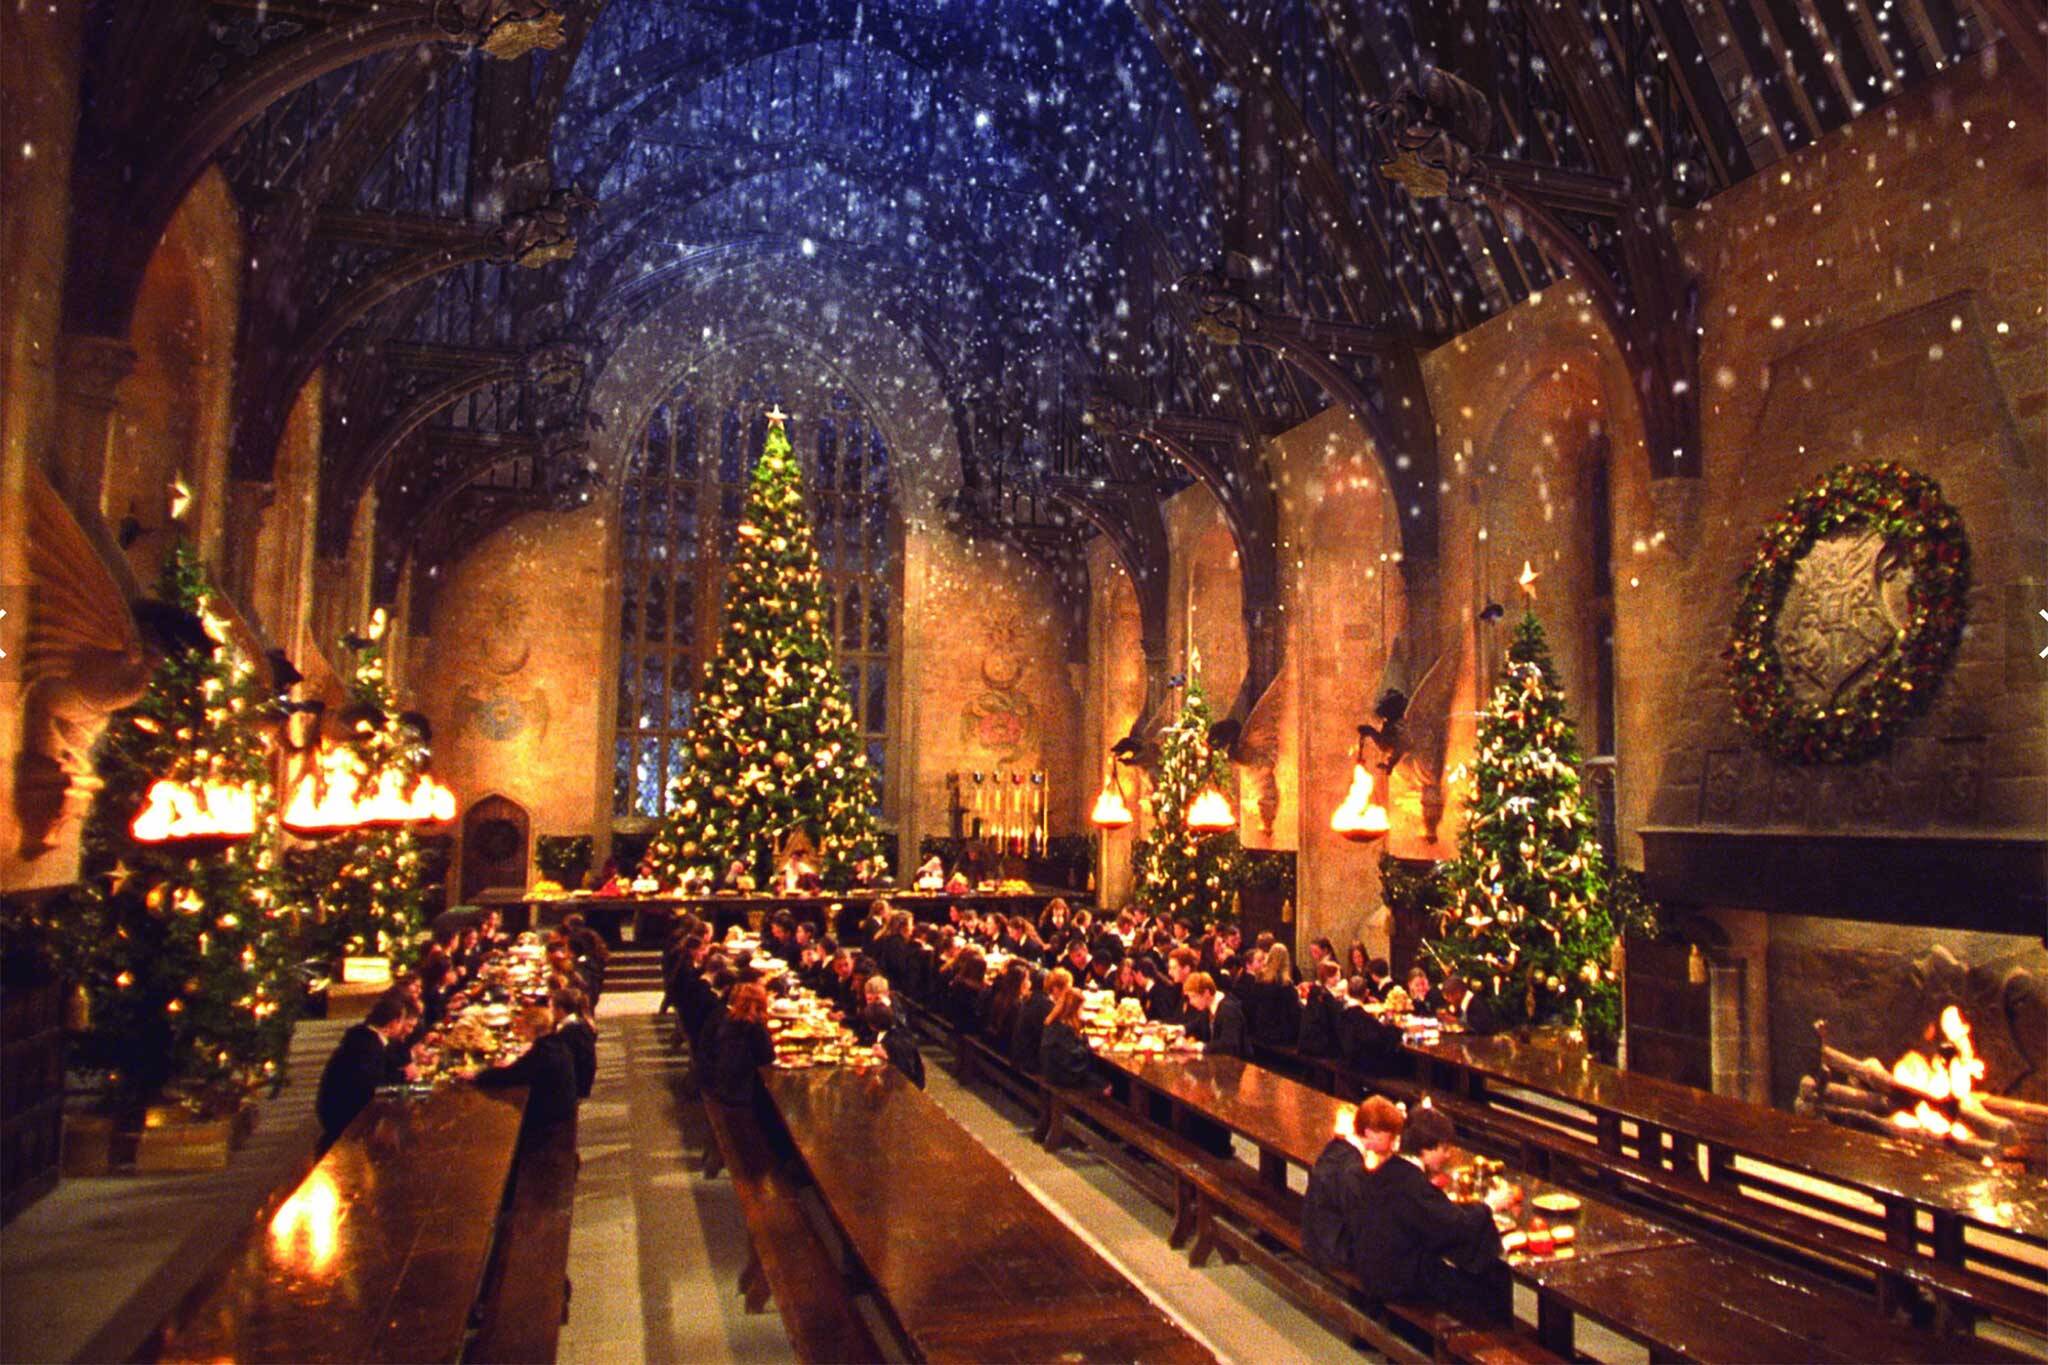 A magical Harry Potterthemed festival is coming to Toronto this winter